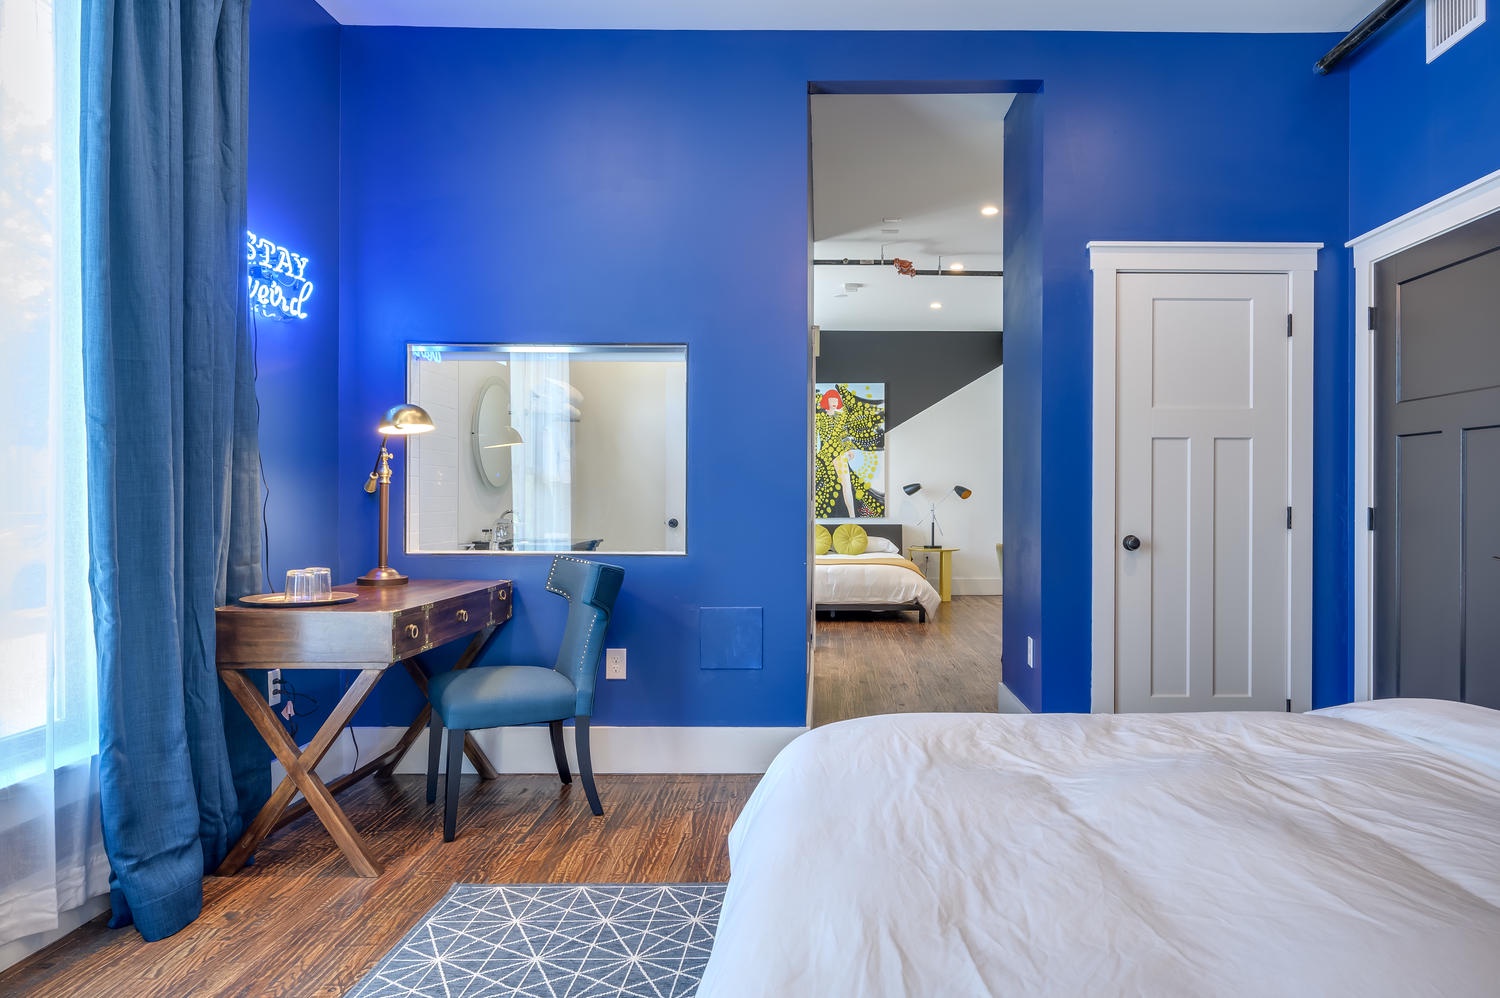 Suite 102 – The 1st Floor Blue Kusama Suite offers King and Queen Casper Beds, Smart TV, Patio Access, and private Bathroom